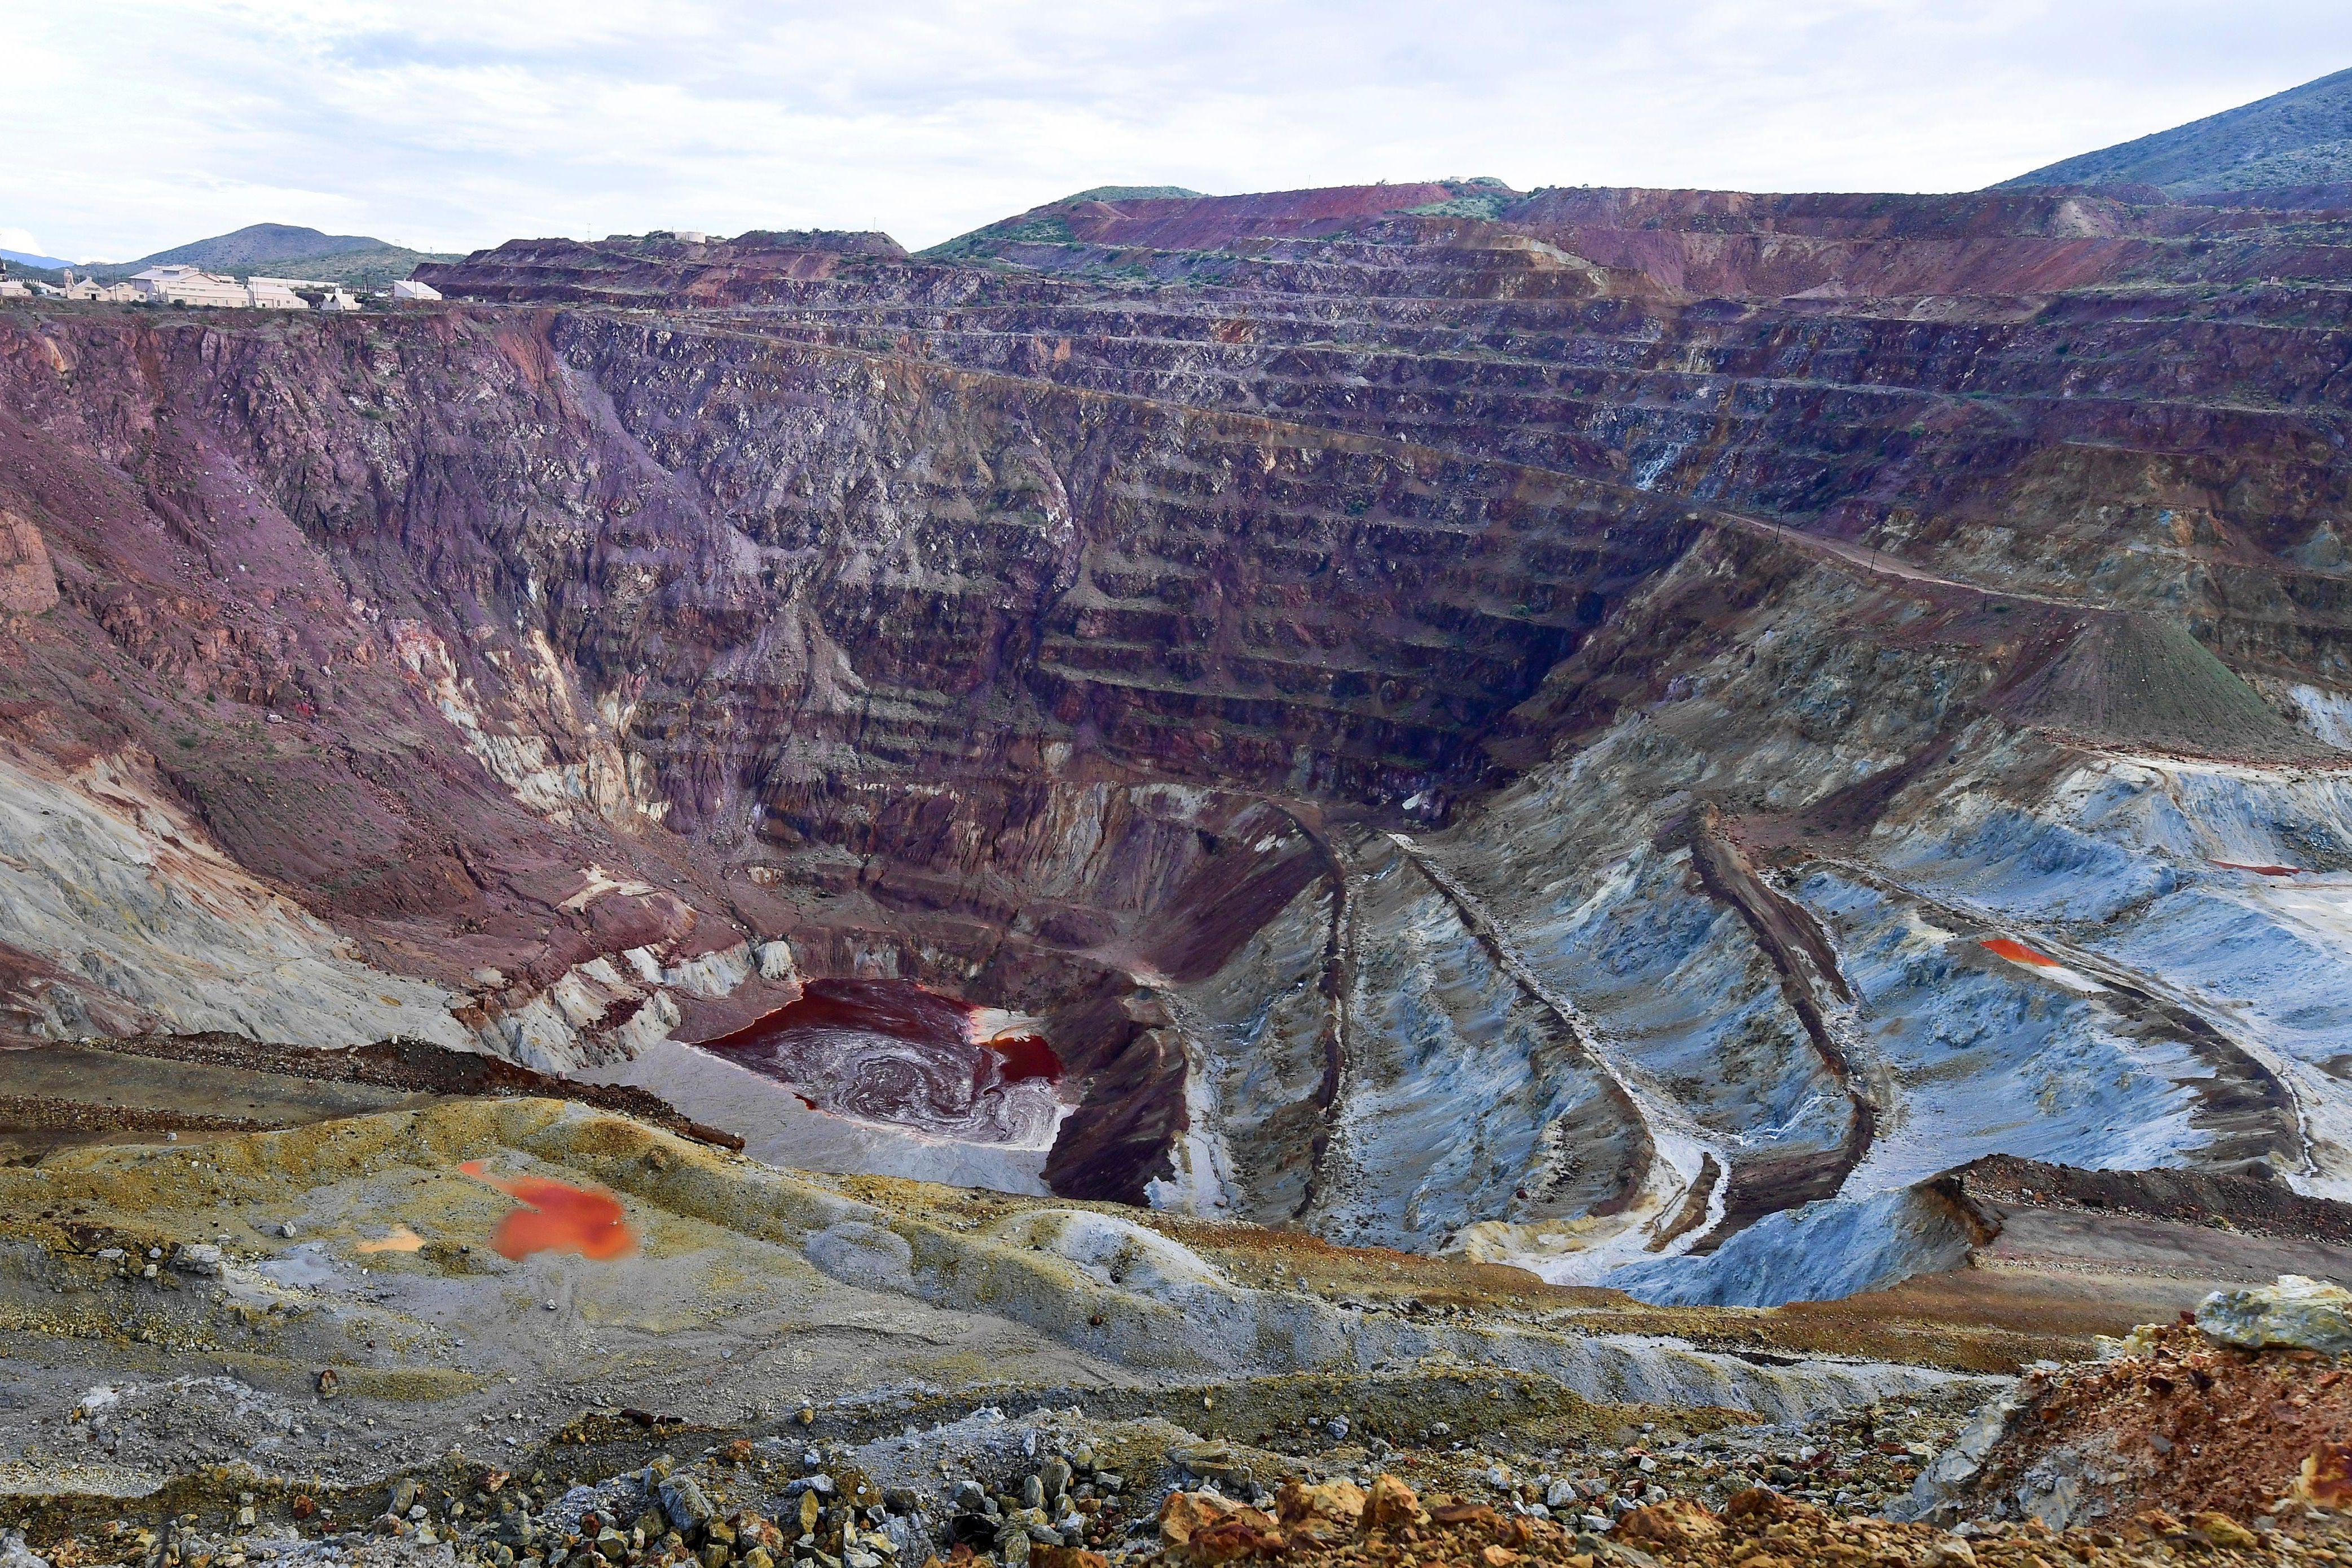 A large open pit mine. The walls surrounding the pit are layered with gray and maroon rock. 